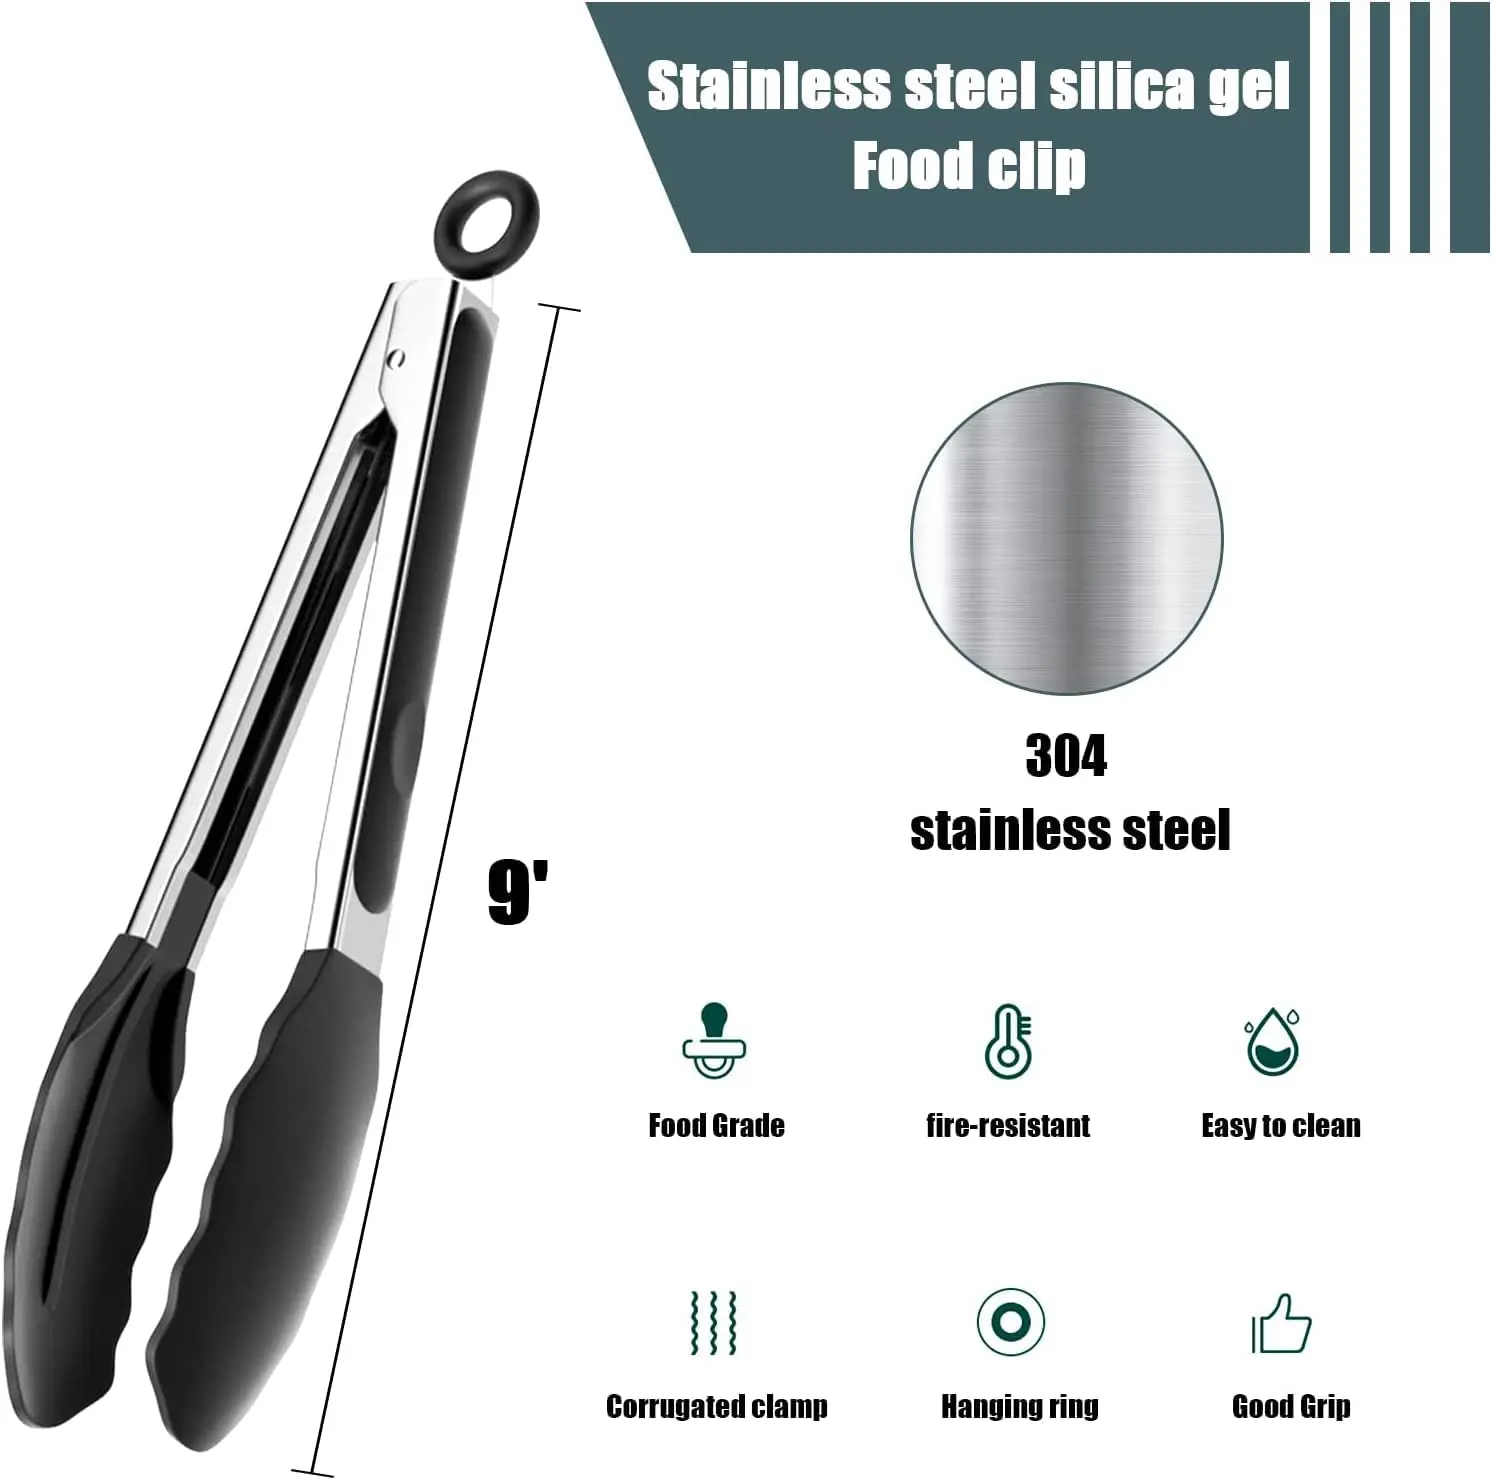 https://ae01.alicdn.com/kf/S1d36255eff5749eaa36c04d1e12e0327w/Silicone-Kitchen-Food-Tongs-Stainless-Steel-BBQ-Grilling-Tong-Non-Stick-Cooking-Barbecue-Clip-Clamp-Kitchen.jpg